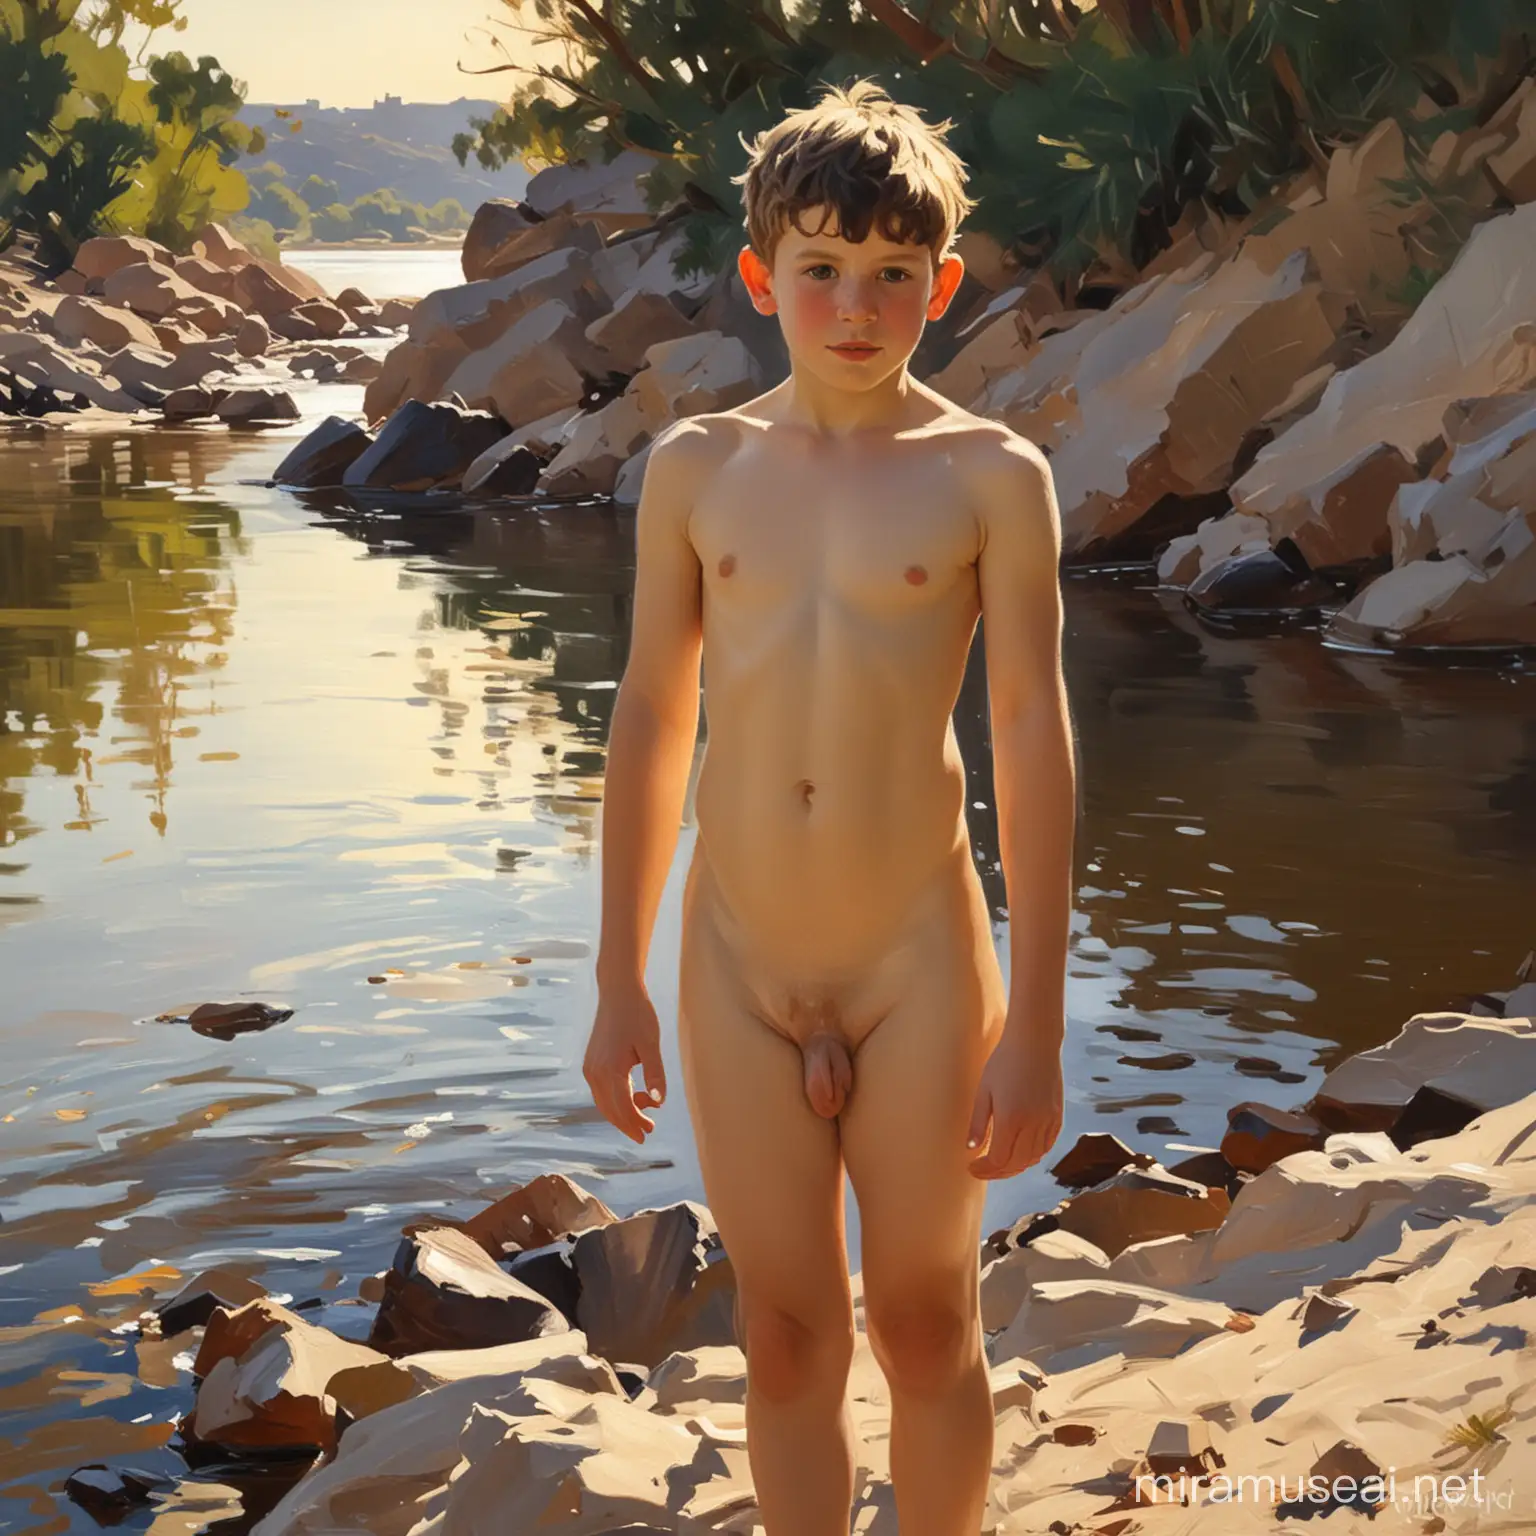 Joaqun Sorolla Style Painting Naked Boy by the River in Counterlighting